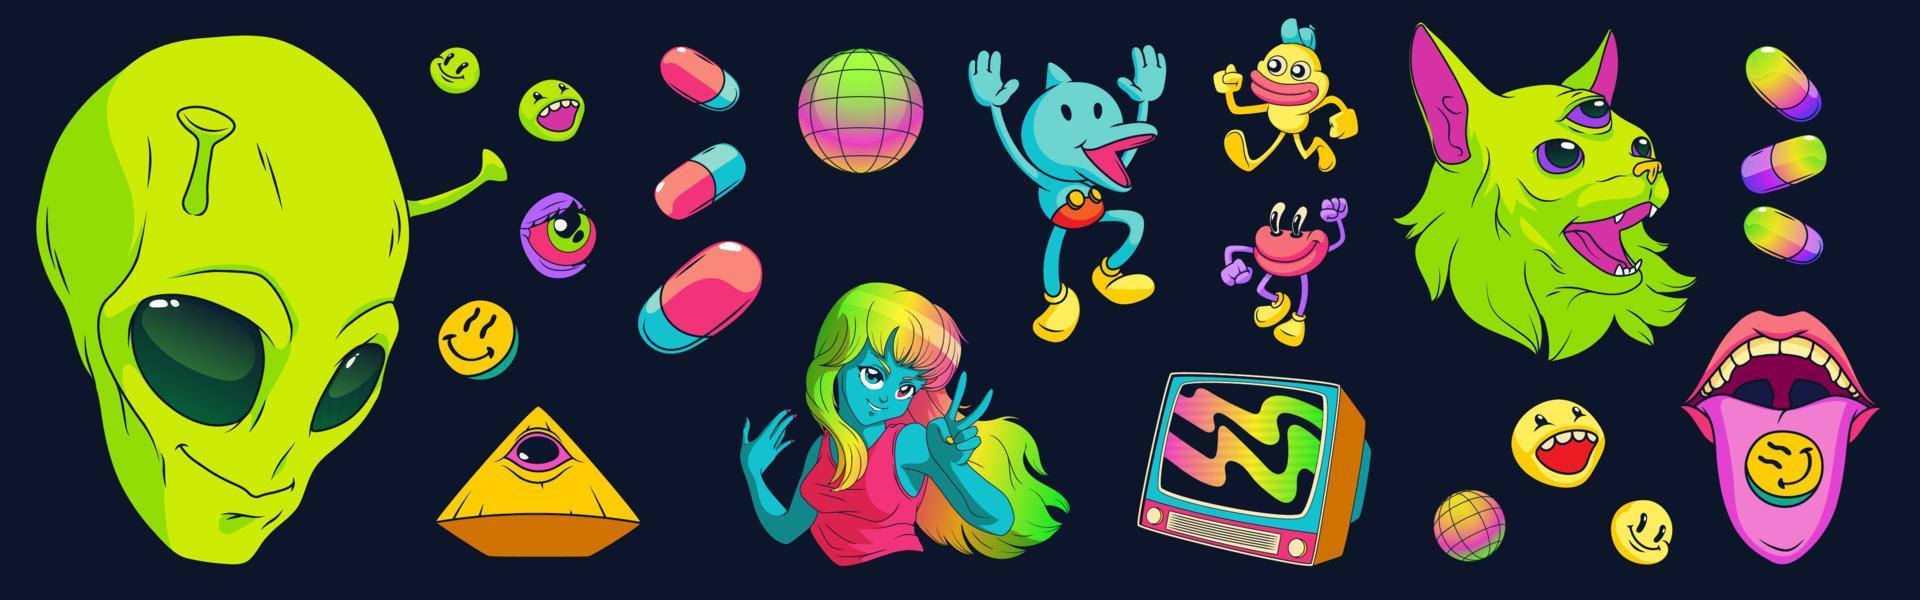 Psychedelic stickers with aliens, drugs vector